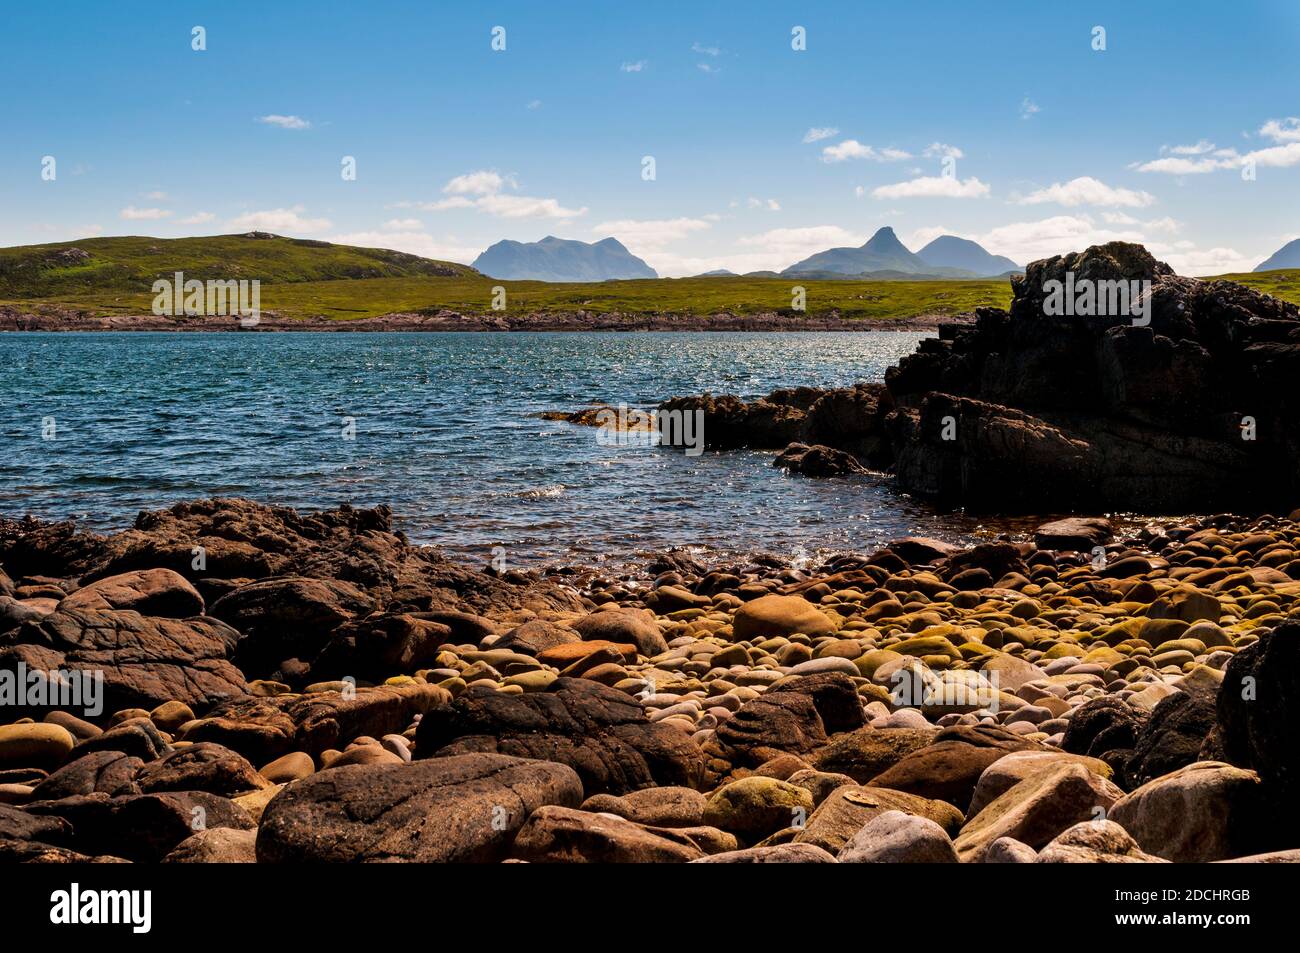 A view across Achnahaird Bay to the distant mountains of Sulvein, Stac Pollaidh and Cùl Beag, on the north west coast of Scotland. June. Stock Photo